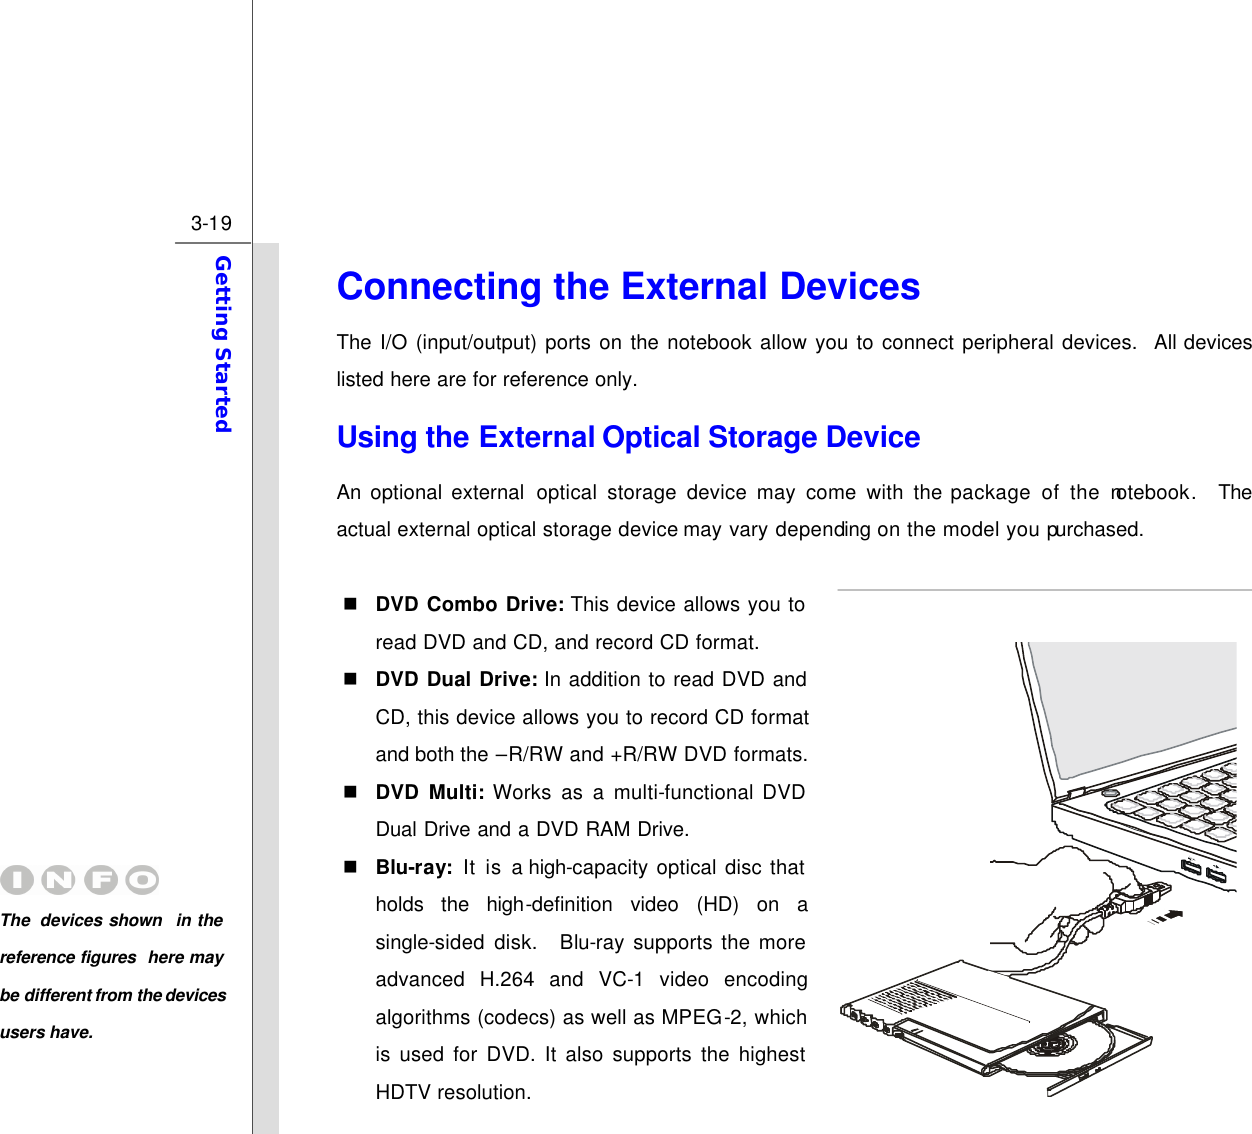  3-19 Getting Started  Connecting the External Devices The I/O (input/output) ports on the notebook allow you to connect peripheral devices.  All devices listed here are for reference only. Using the External Optical Storage Device An optional external optical storage device may come with the package of the notebook.  The actual external optical storage device may vary depending on the model you purchased.  n DVD Combo Drive: This device allows you to read DVD and CD, and record CD format. n DVD Dual Drive: In addition to read DVD and CD, this device allows you to record CD format and both the –R/RW and +R/RW DVD formats. n DVD Multi: Works as a multi-functional DVD Dual Drive and a DVD RAM Drive. n Blu-ray: It is a high-capacity optical disc that holds  the  high-definition video (HD) on a single-sided disk.  Blu-ray supports the more advanced H.264 and VC-1 video encoding algorithms (codecs) as well as MPEG-2, which is used for DVD. It also supports the highest HDTV resolution. The  devices shown in the reference figures here may be different from the devices users have.  